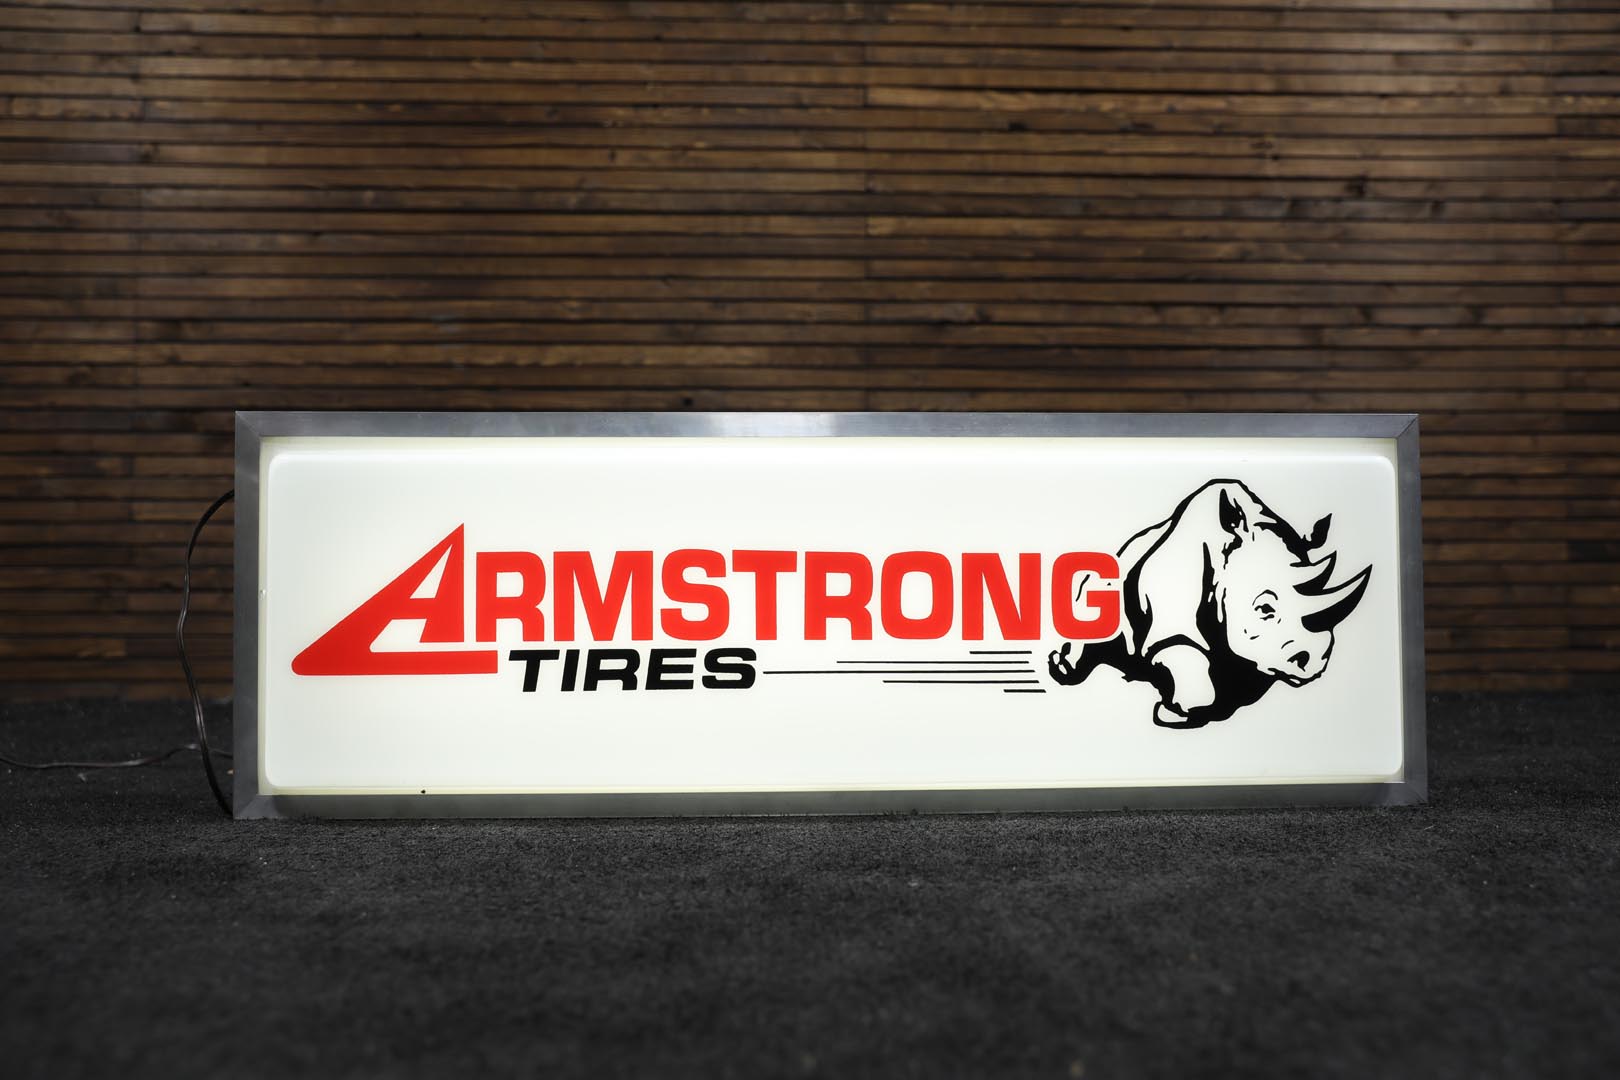  Armstrong Tires Double-Sided L ighted Sign 